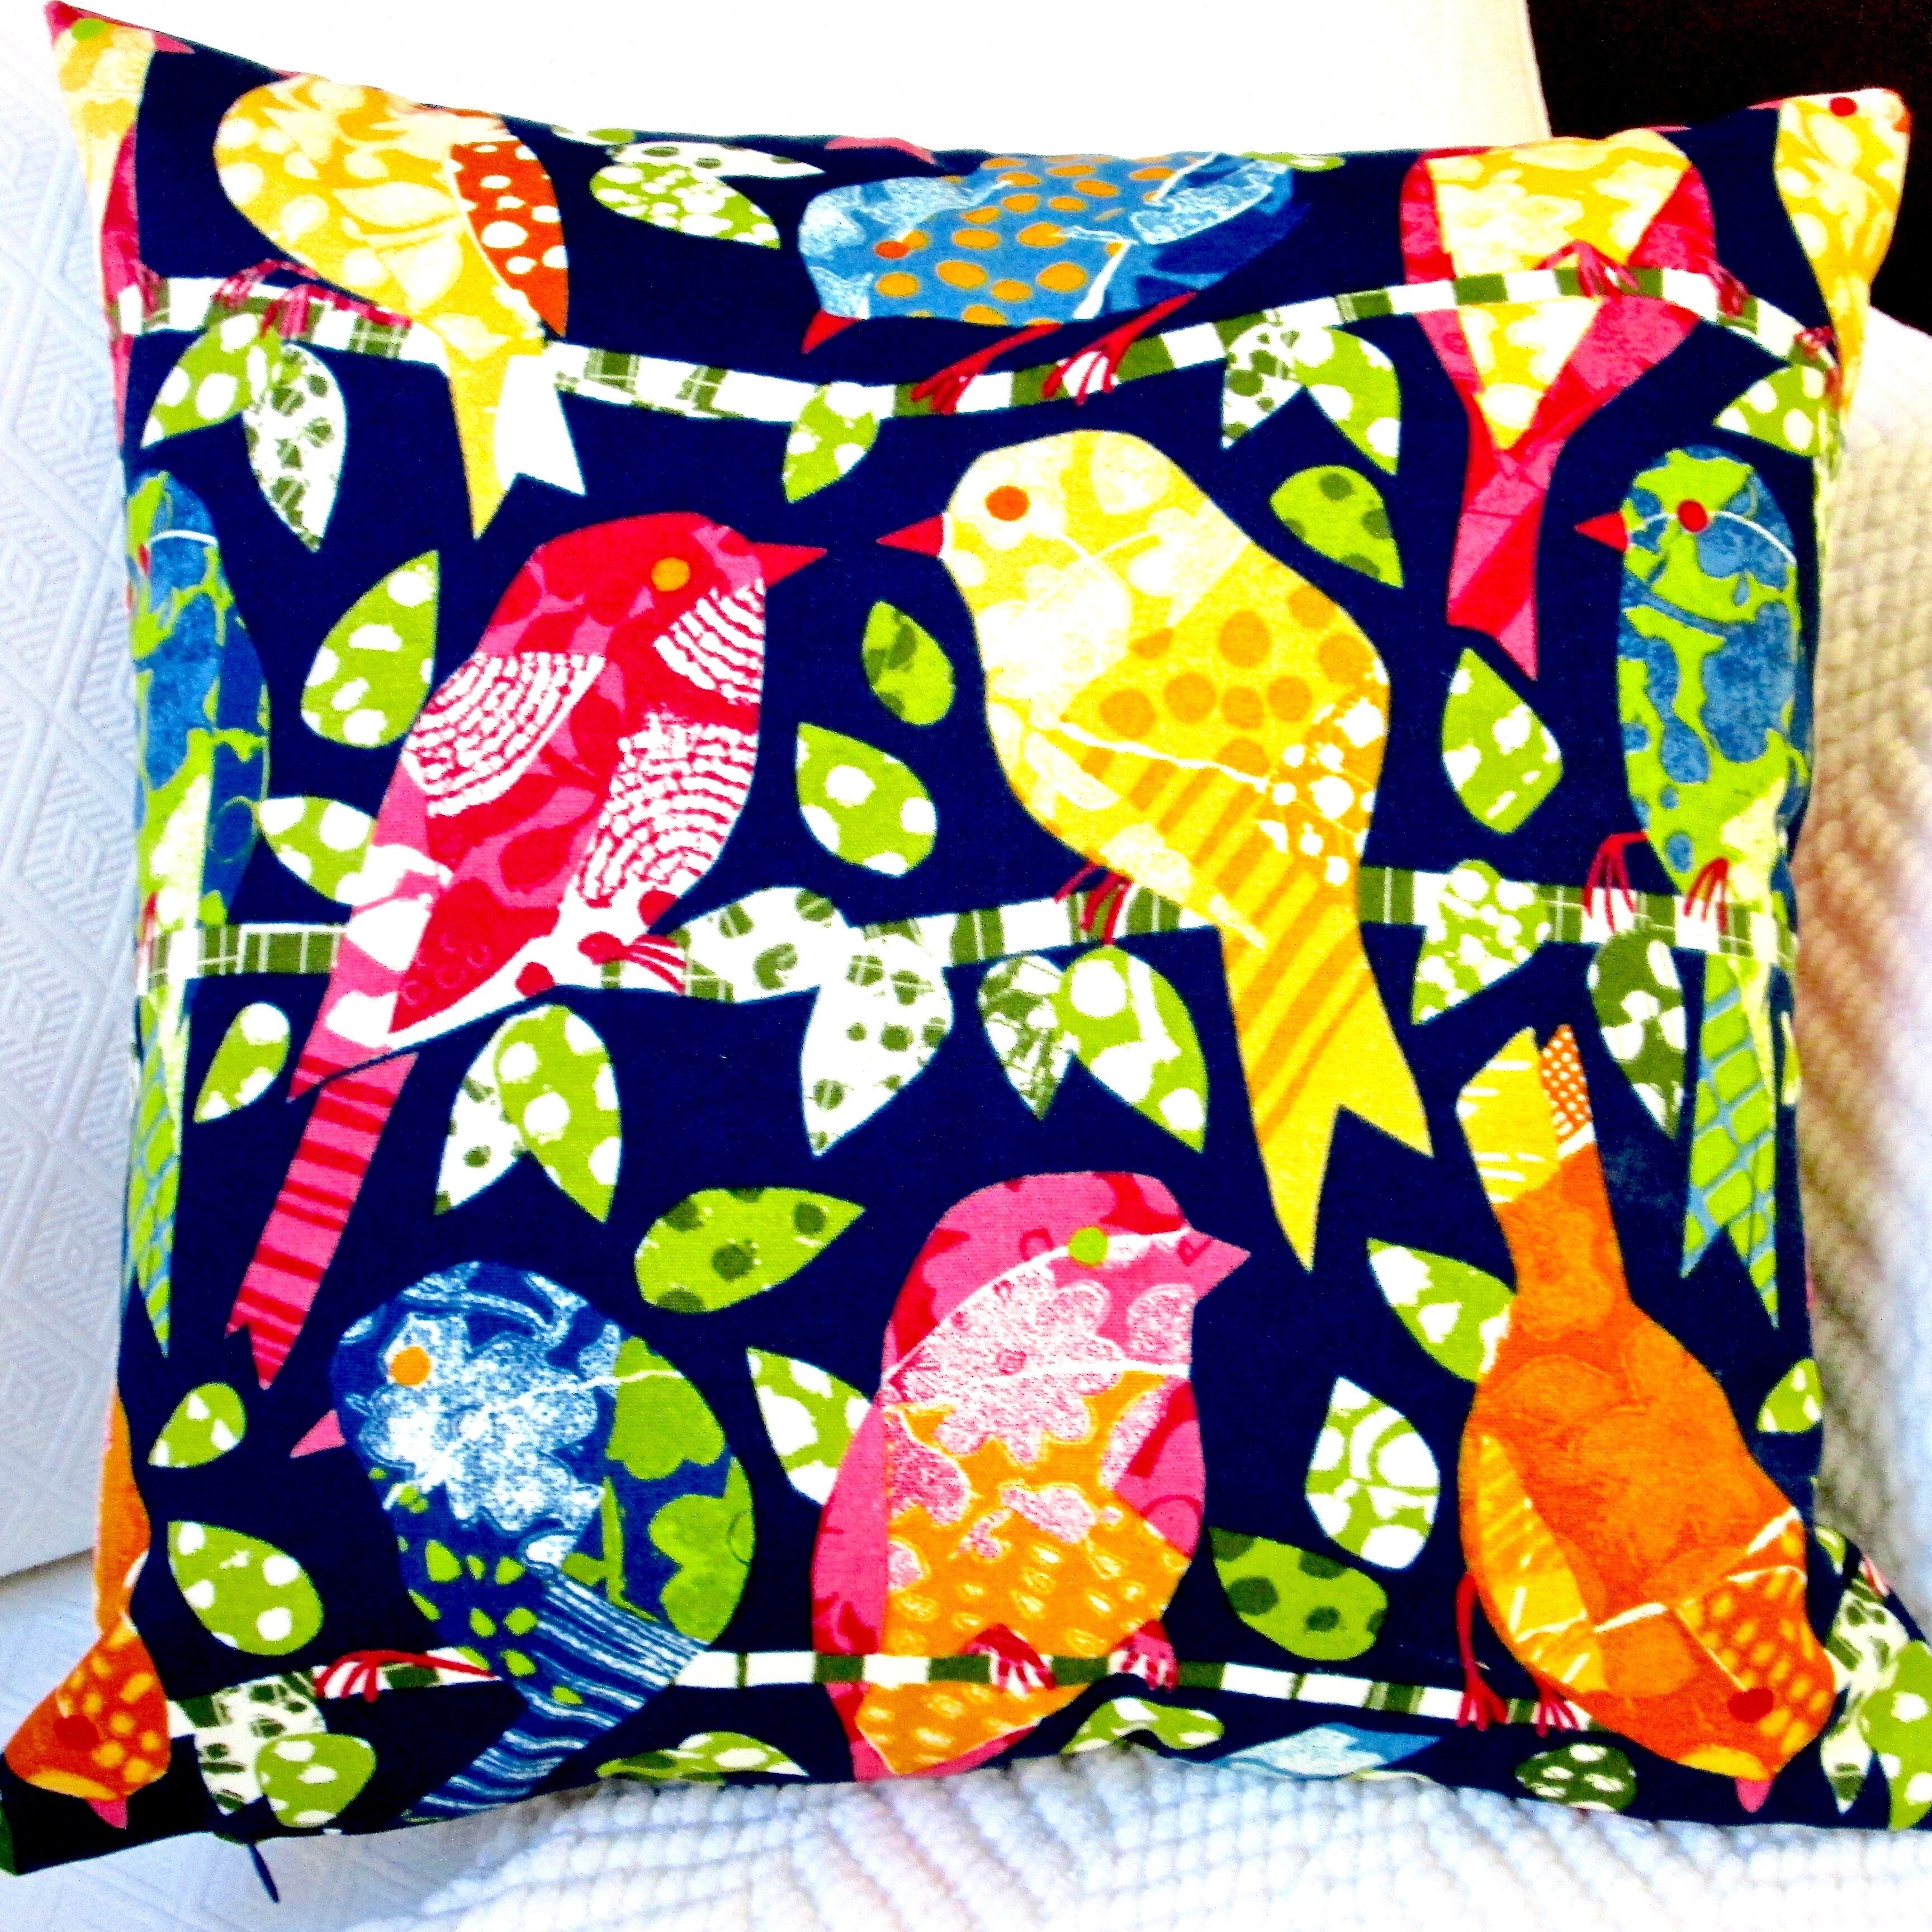 https://ak1.ostkcdn.com/images/products/10219658/Artisan-Pillows-Indoor-Outdoor-18-inch-Kids-Colorful-Birds-in-Navy-Blue-Throw-Pillow-Cover-Set-of-2-8db6b612-c367-48fd-886d-60334cbdc7db.jpg